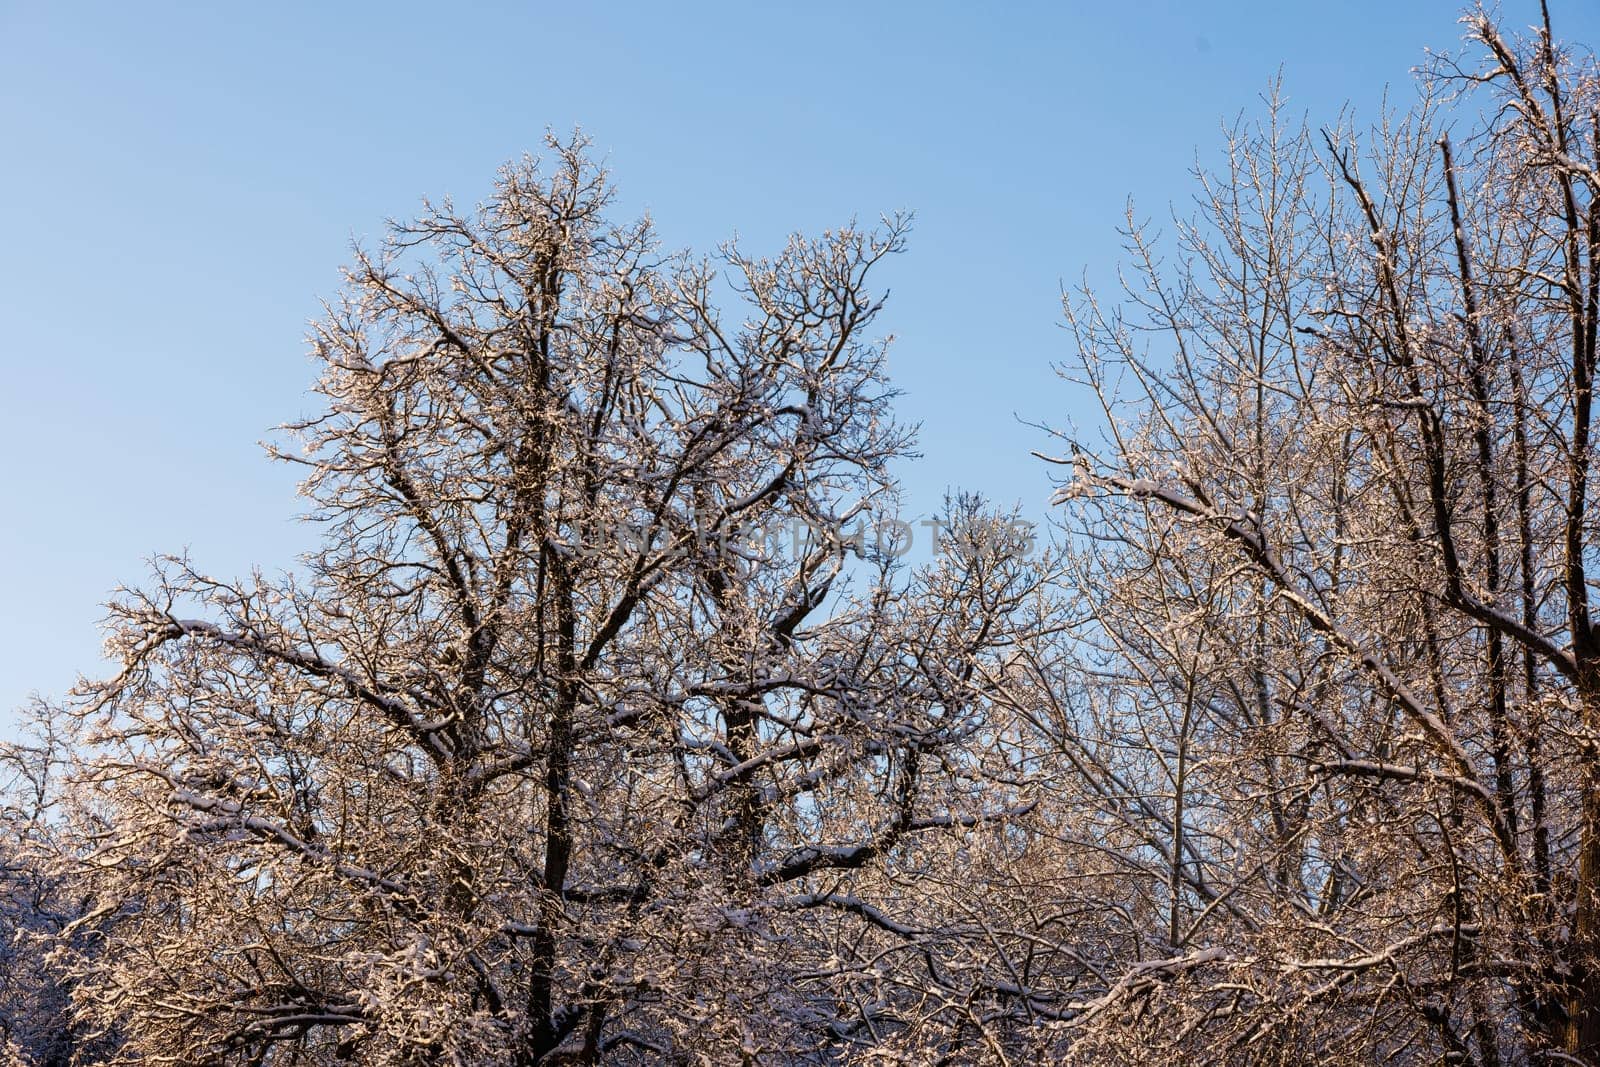 Snowy trees against blue sky in at sunset by z1b